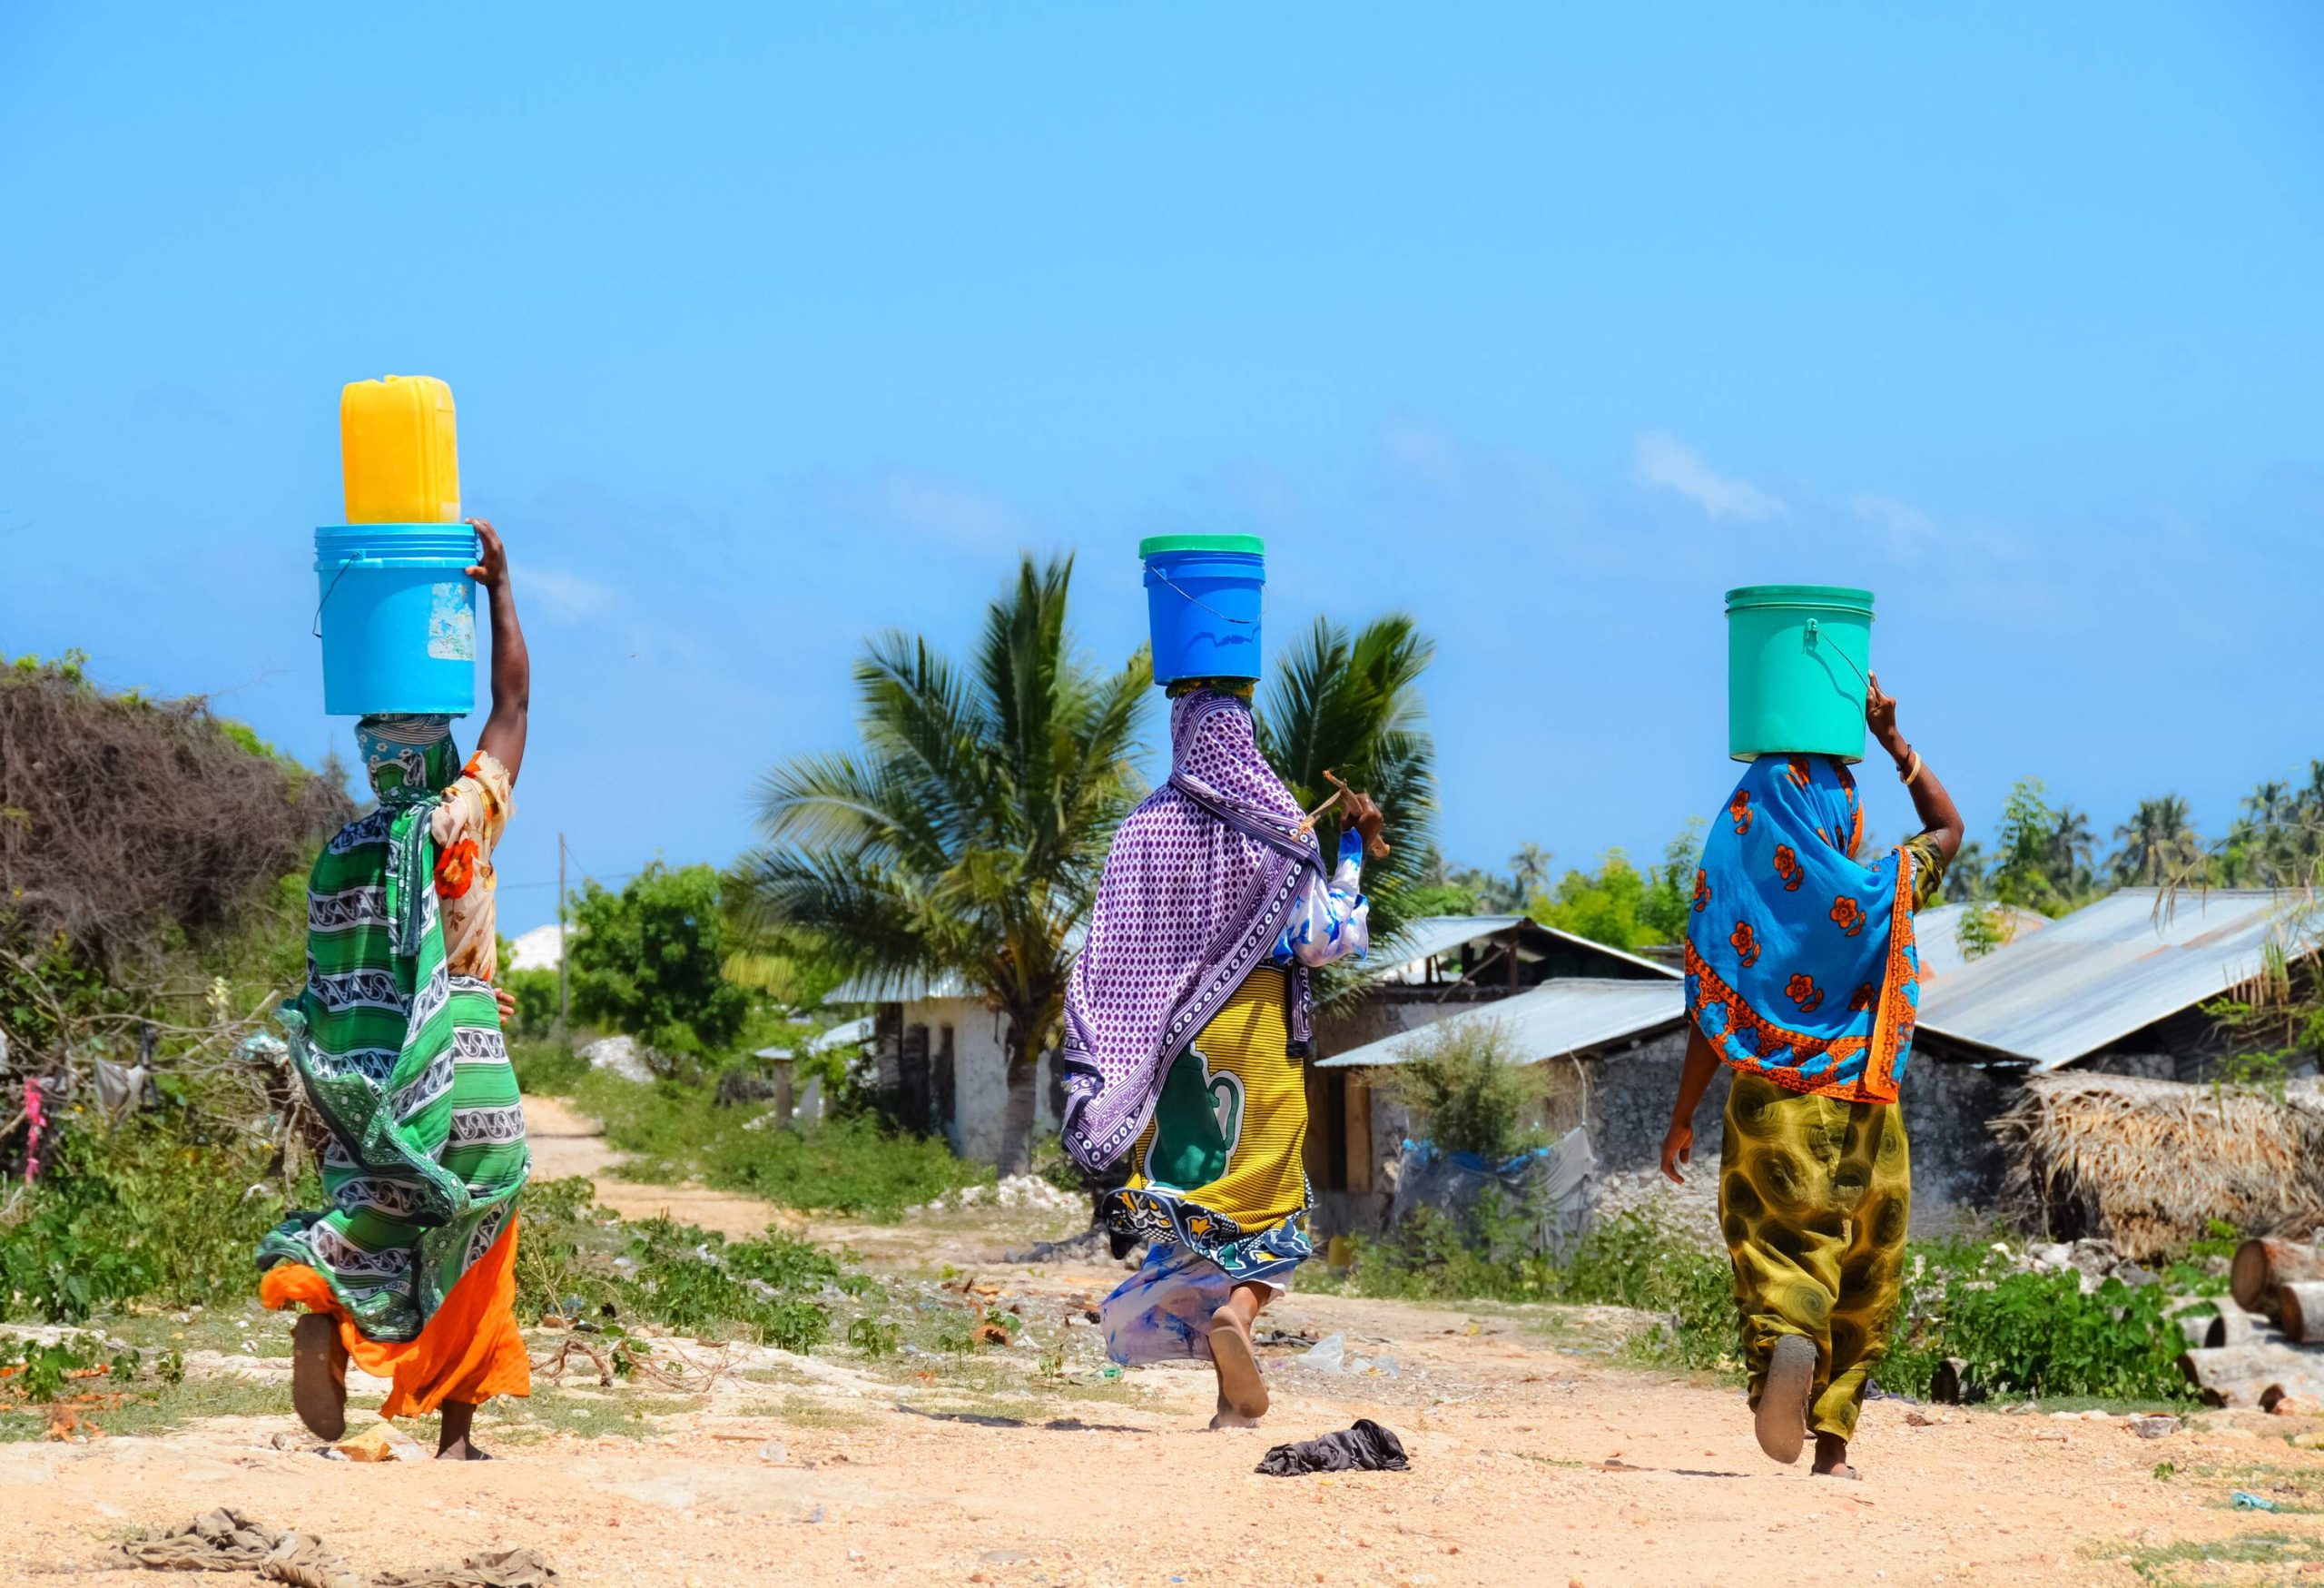 A rear view of three women carrying buckets on their heads walks toward the houses.